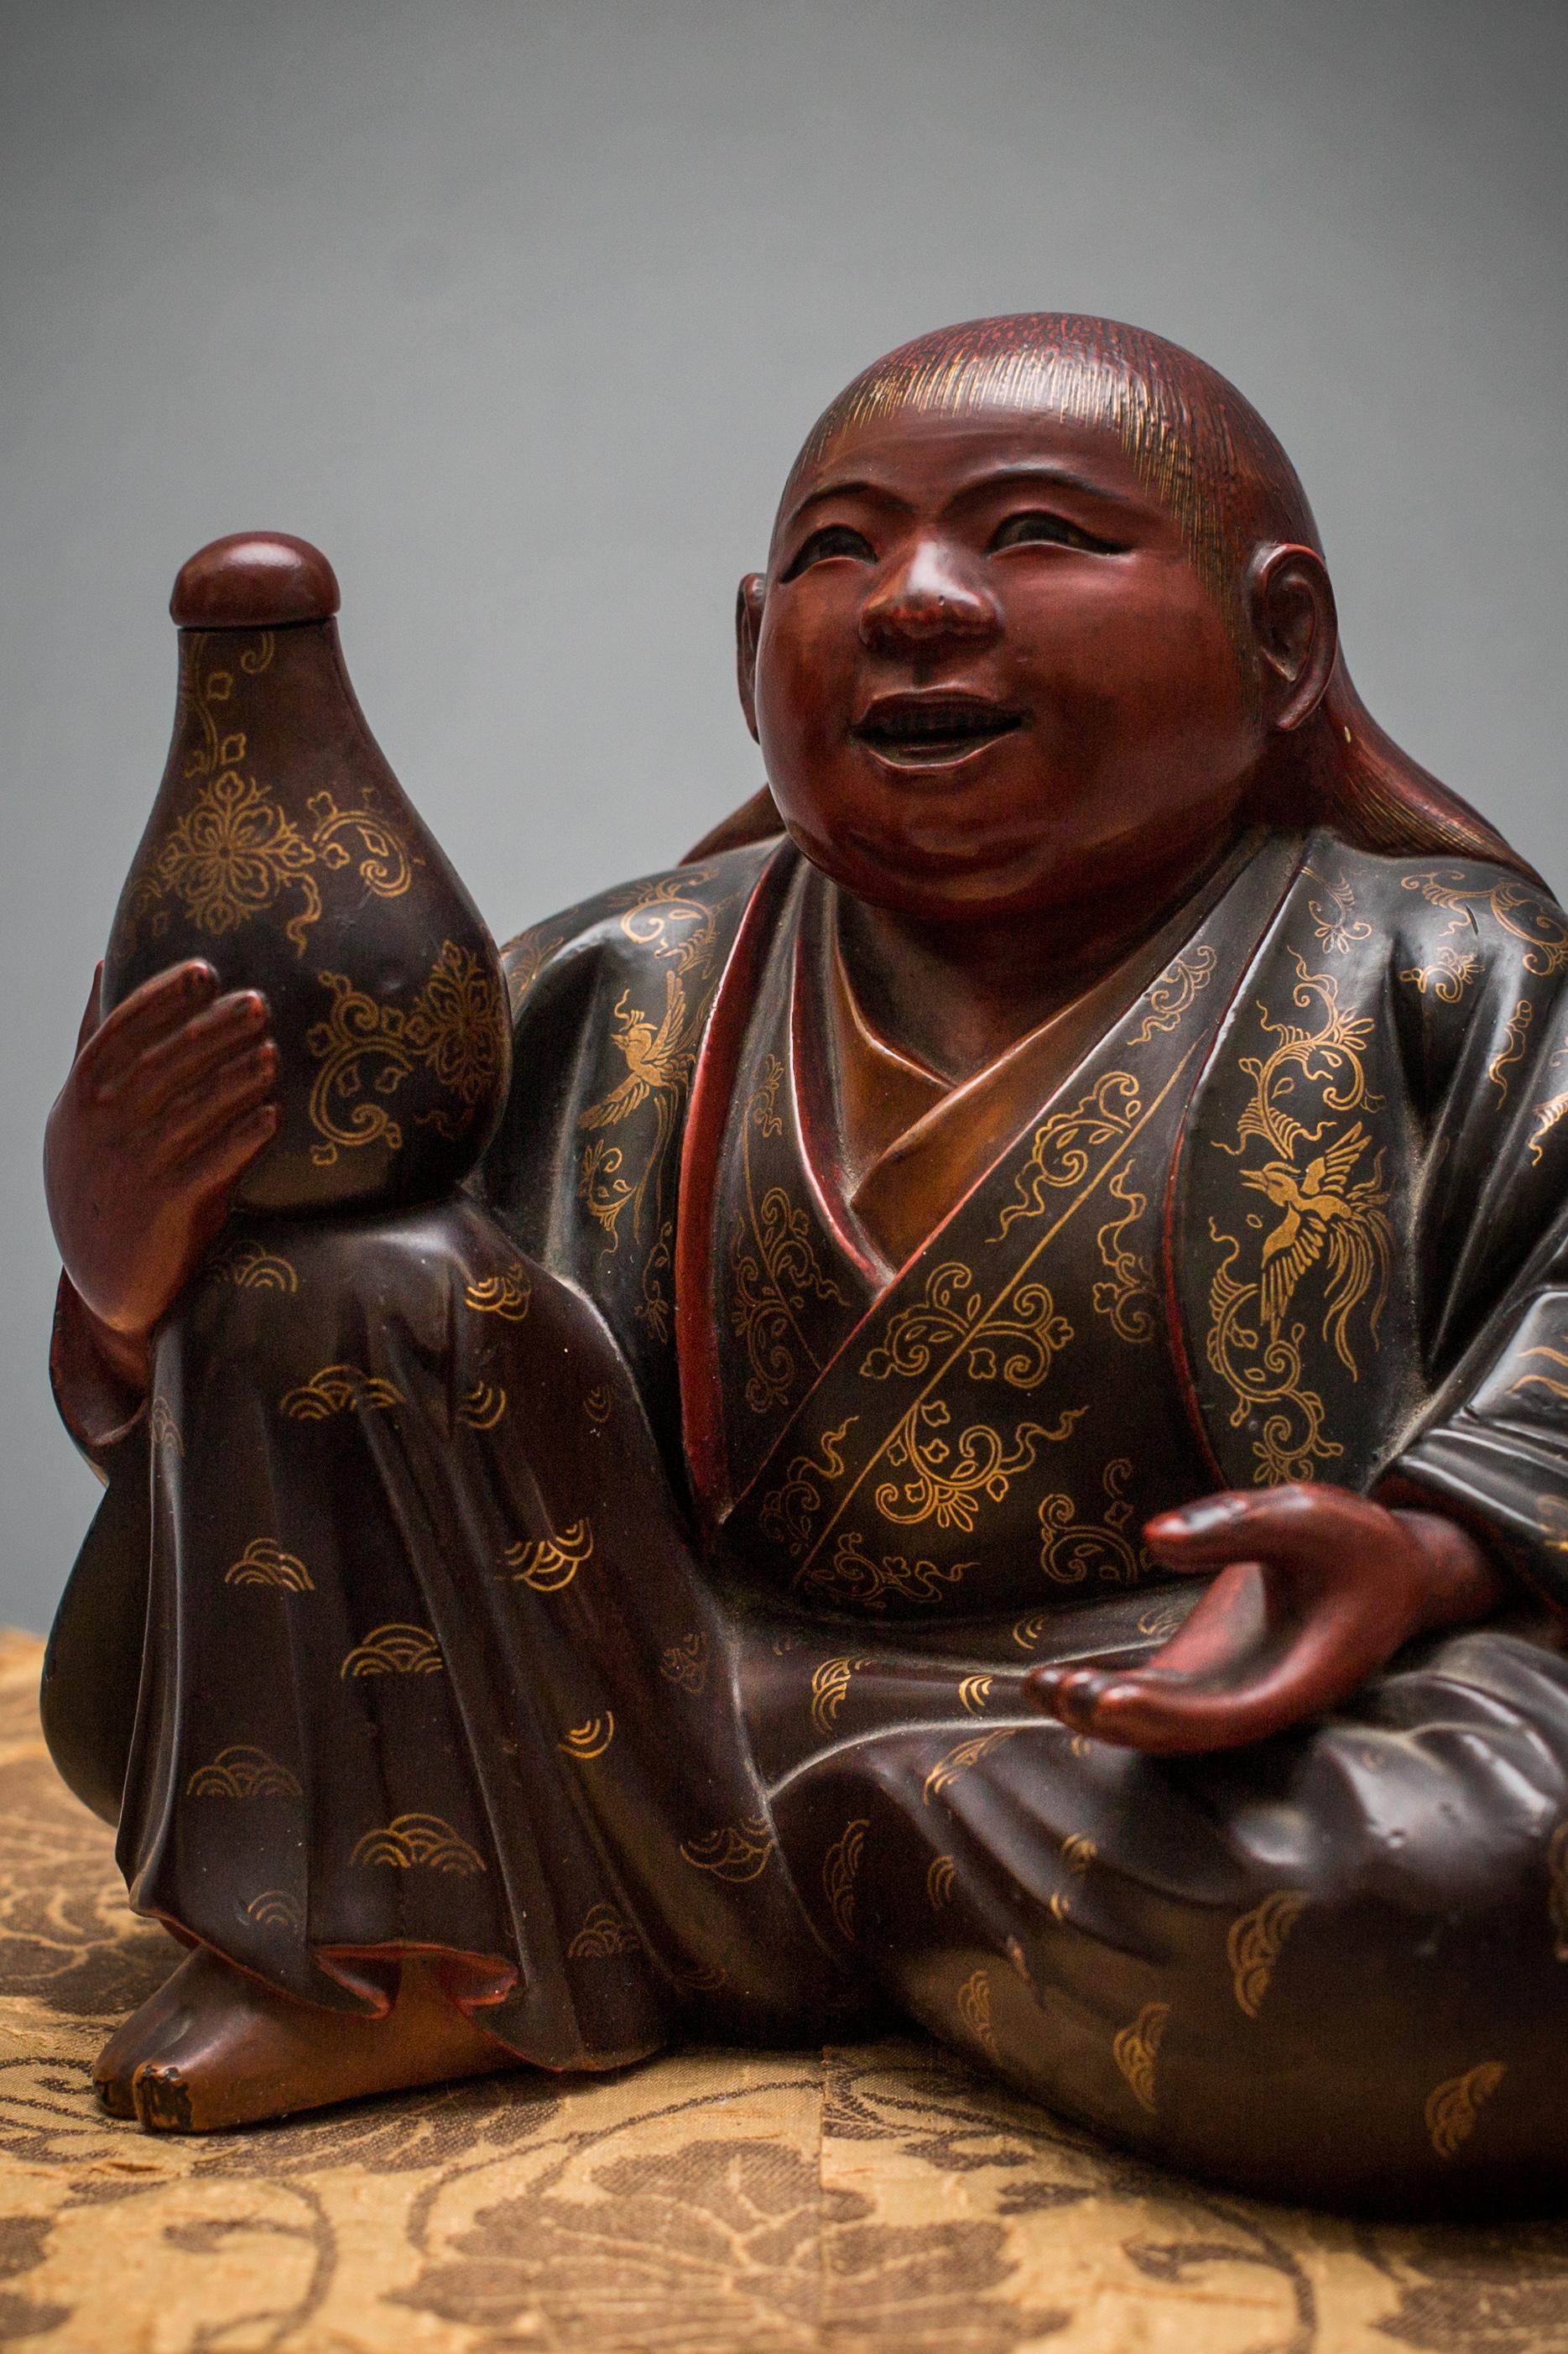 In the shape of a red-faced shijo holding his own tokkuri.